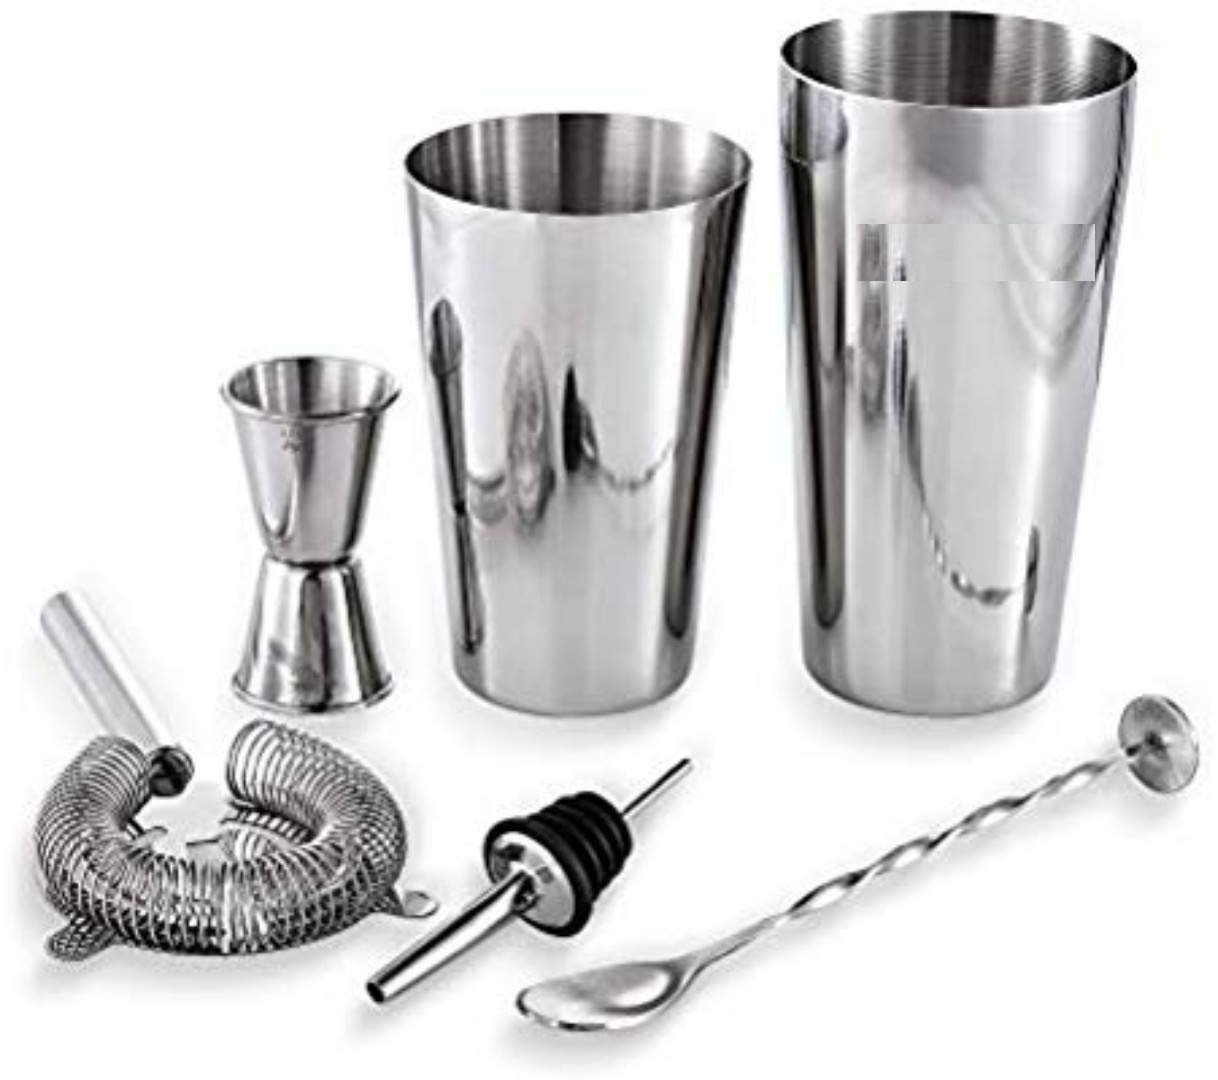 Rudra Exports  Stainless Steel Cocktail, Martini, Drink, Boston Shaker Double Measuring Jigger, Mixing Spoon Bartender Kit - Set 6 Piece